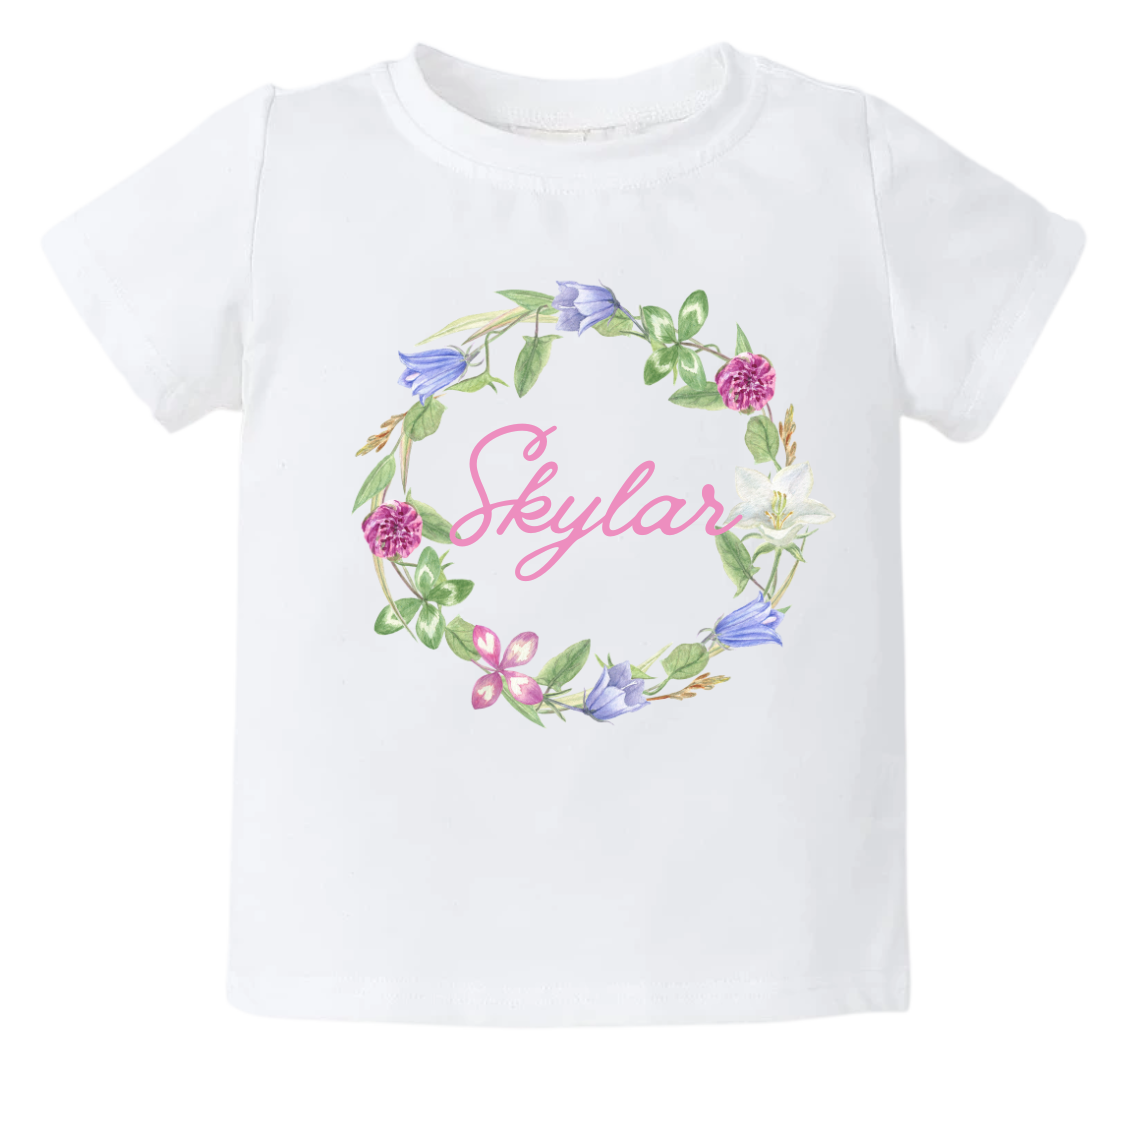 Kid's t-shirt with a cute floral wreath design, customizable with names.